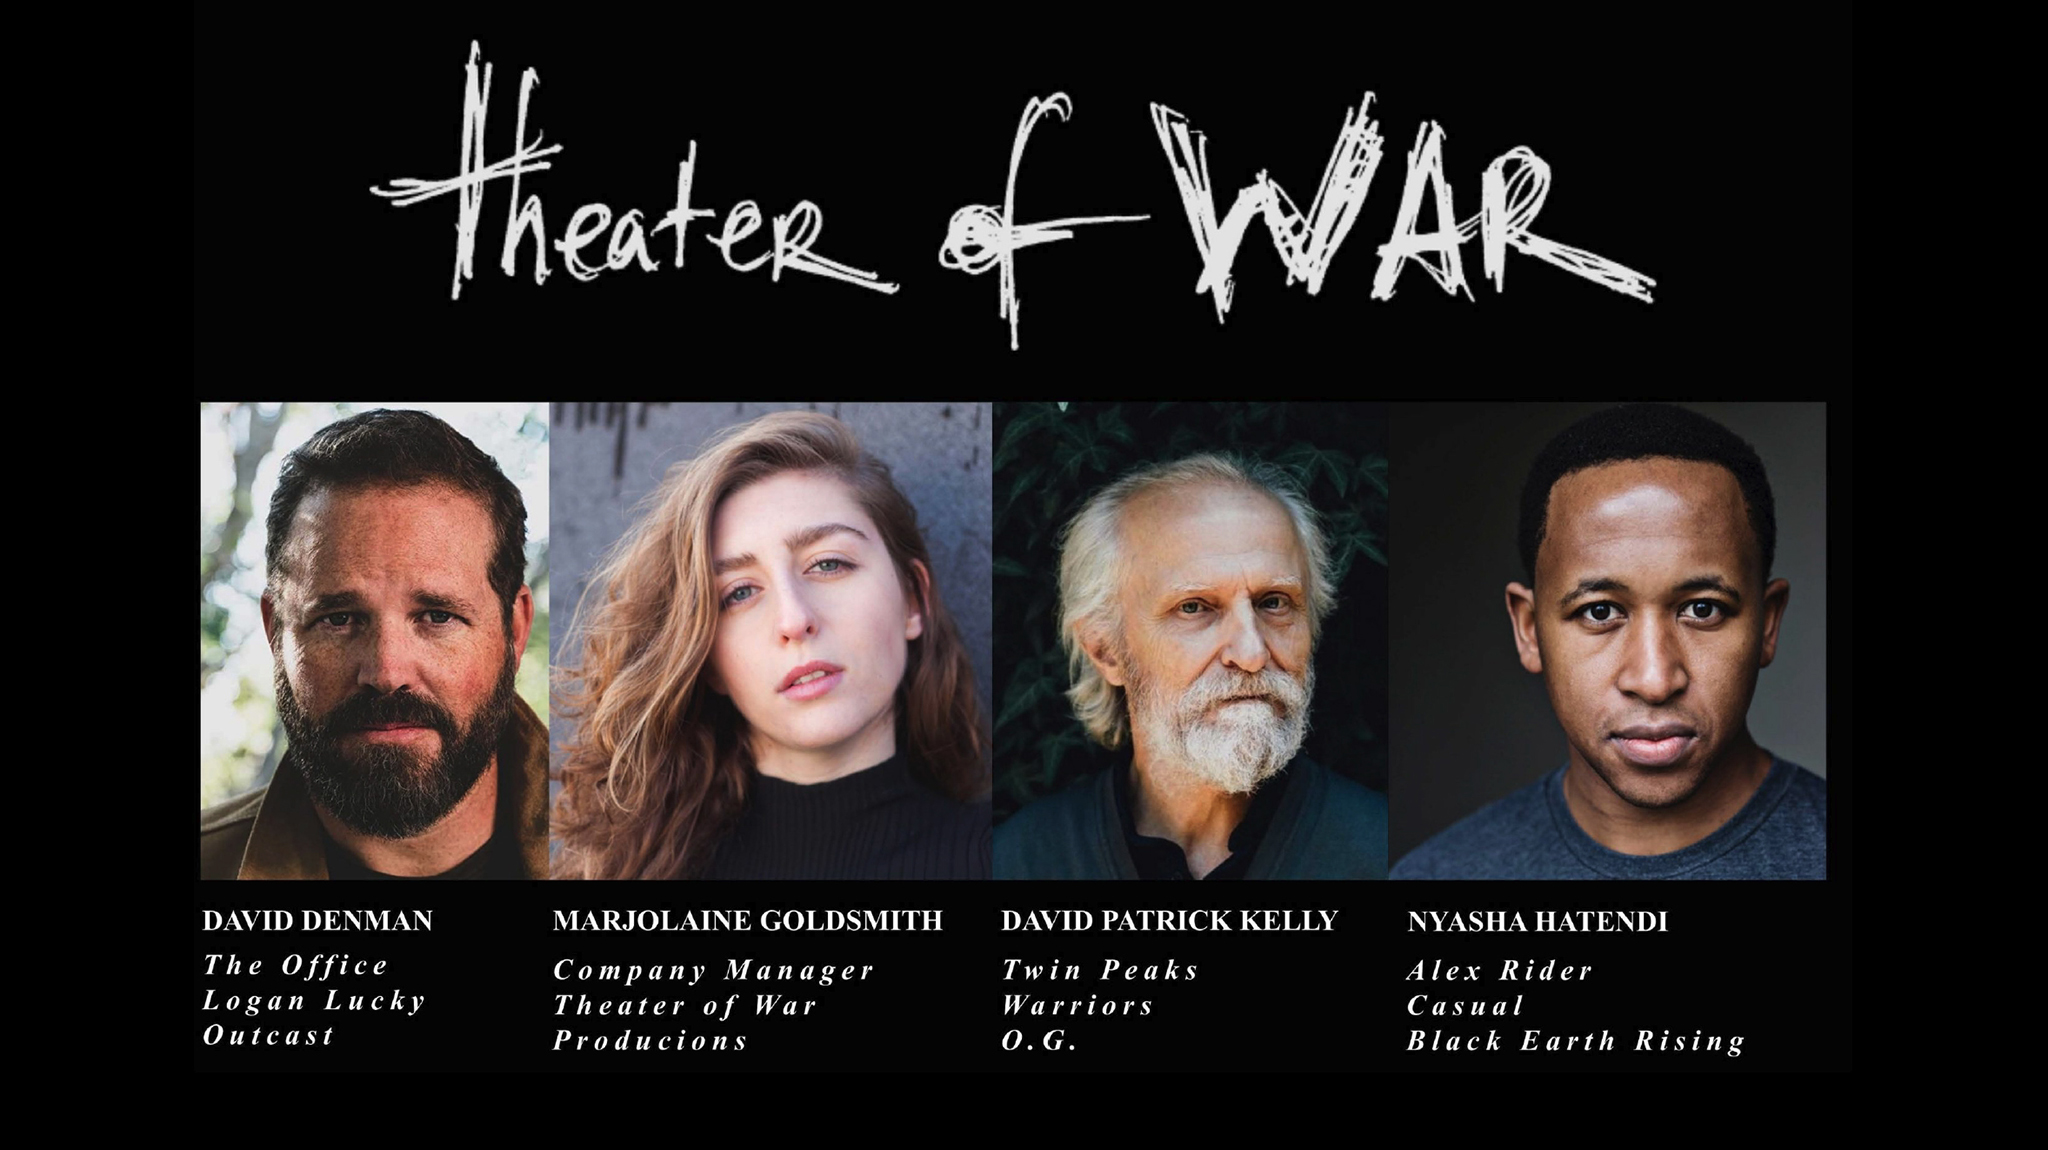 This year’s Theater of War production features a staged reading of Sophocles’ ‘Philoctetes’ with professional actors (from left) David Denman, Marjolaine Goldsmith, David Patrick Kelly and Nyasha Hatendi. The UM Department of Classics and Office of Veteran and Military Services have teamed to host a screening of the performance and discussion featuring local veterans Thursday (Nov. 11) evening at the Oxford Conference Center. 